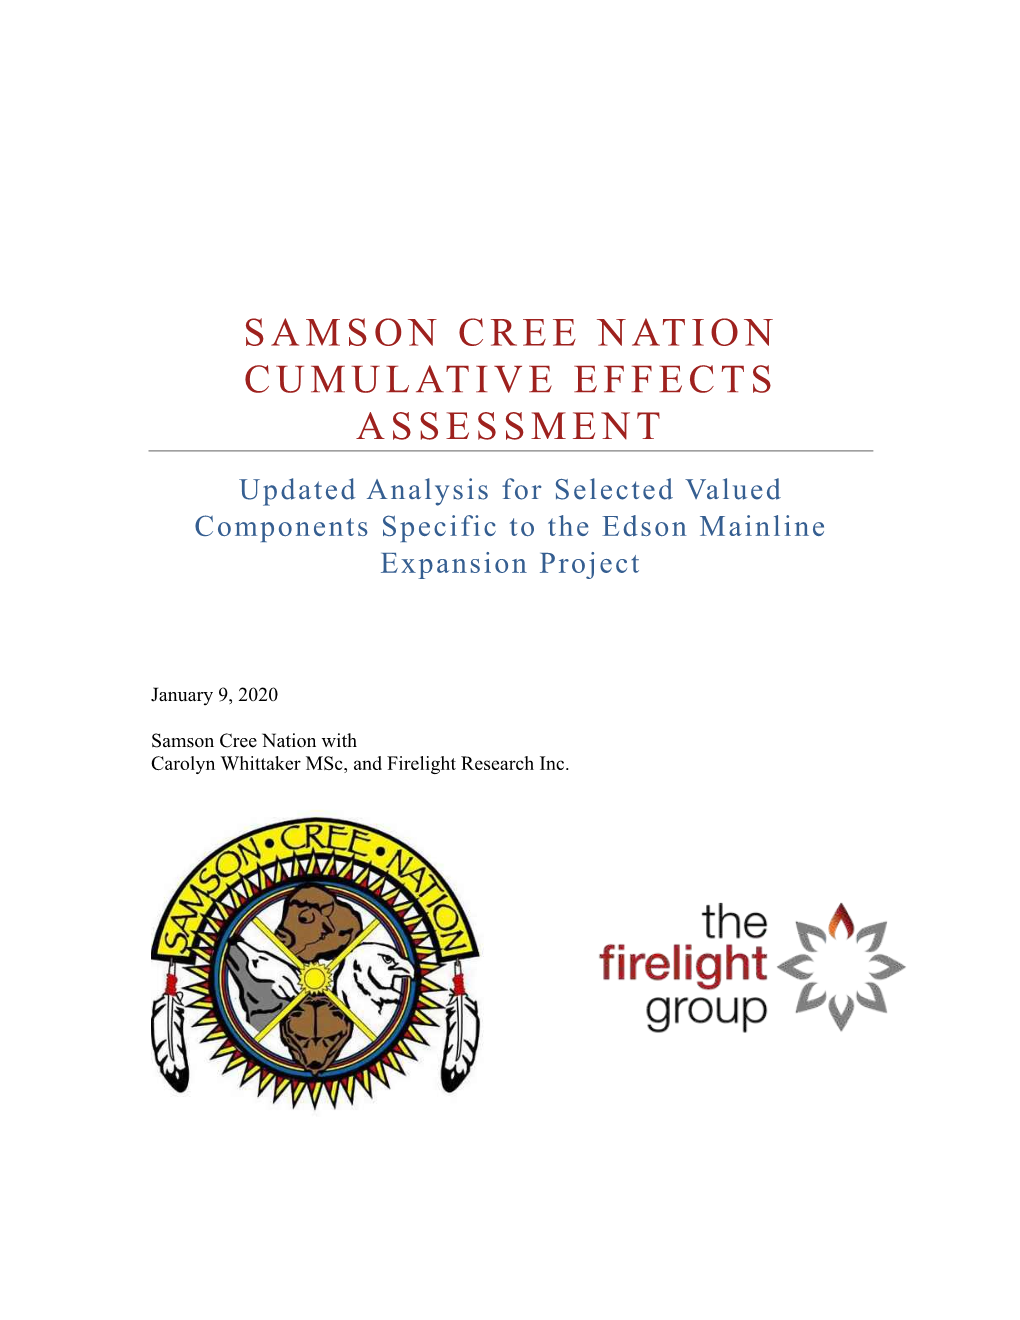 SAMSON CREE NATION CUMULATIVE EFFECTS ASSESSMENT Updated Analysis for Selected Valued Components Specific to the Edson Mainline Expansion Project